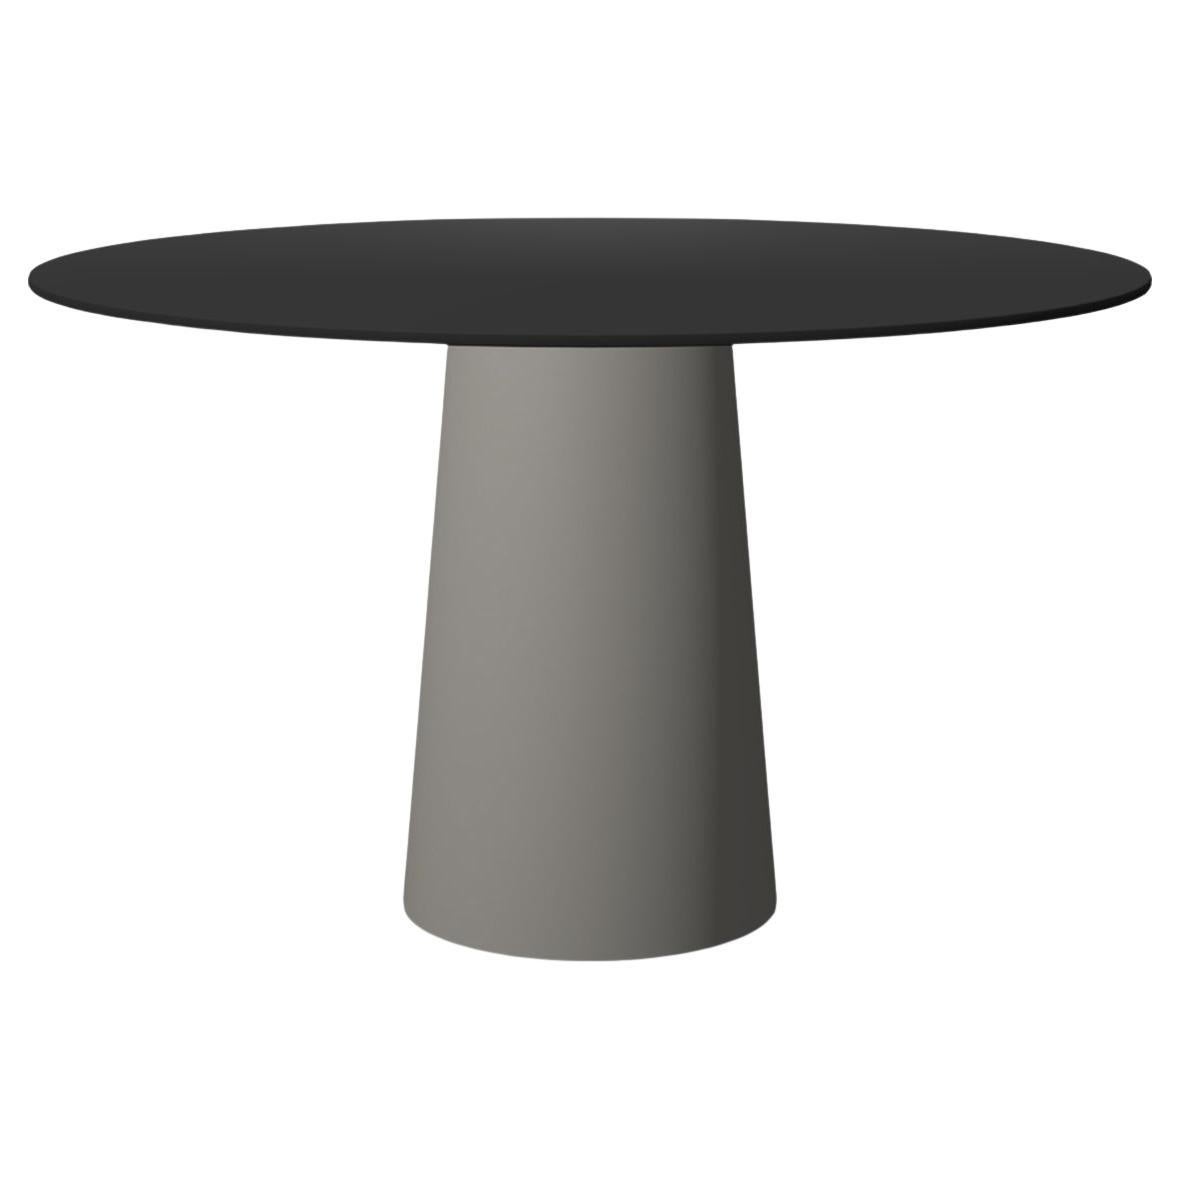 Moooi Container 120 Dining Table in Grey Base & Black Top, Marcel Wanders Studio For Sale